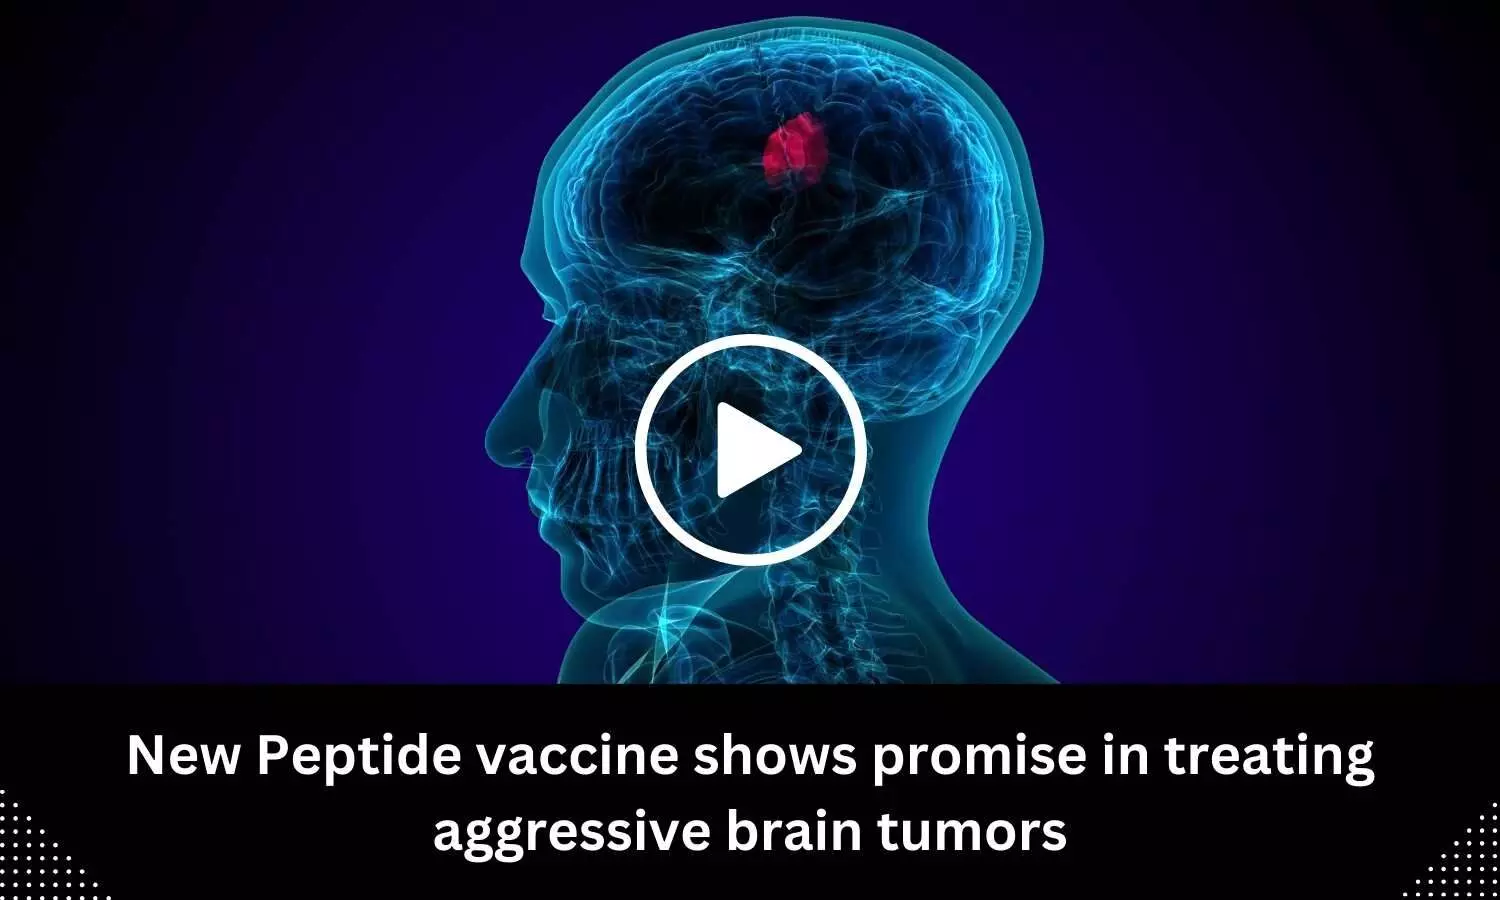 New Peptide vaccine shows promise in treating aggressive brain tumors